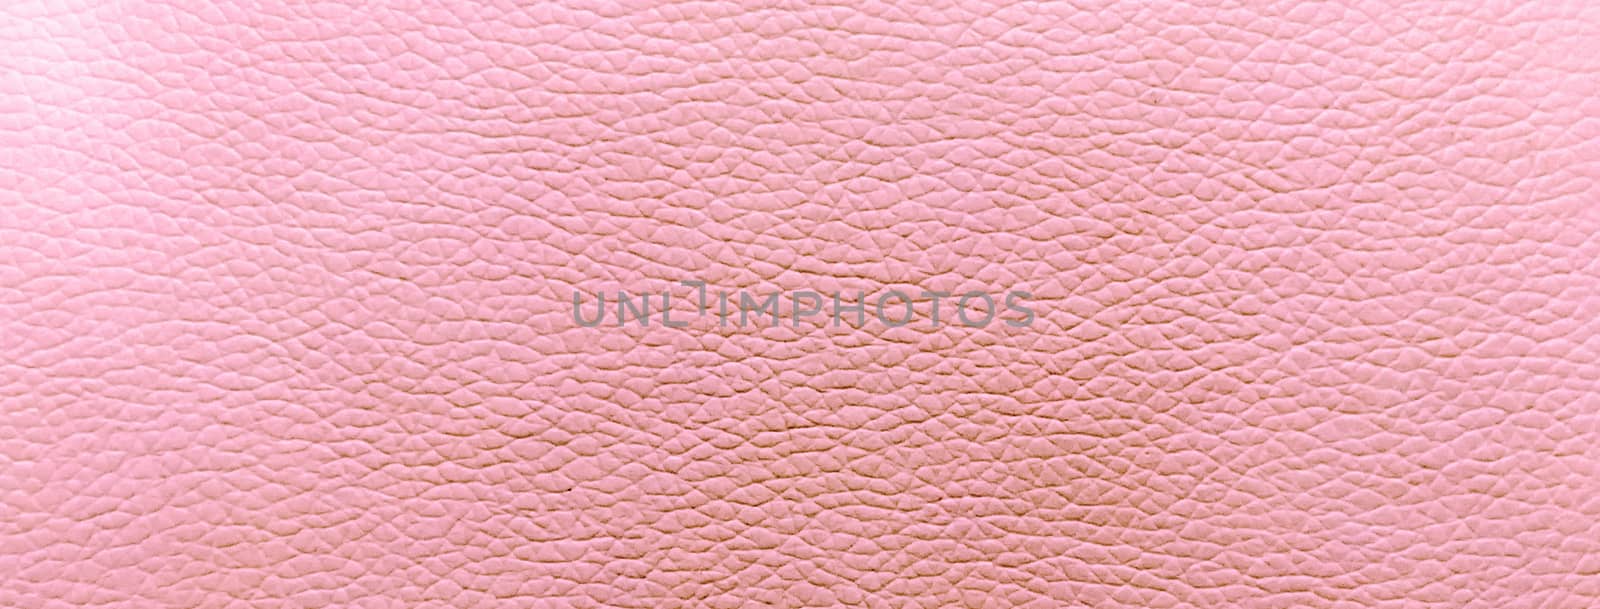 Pink leather texture, may be used as  background